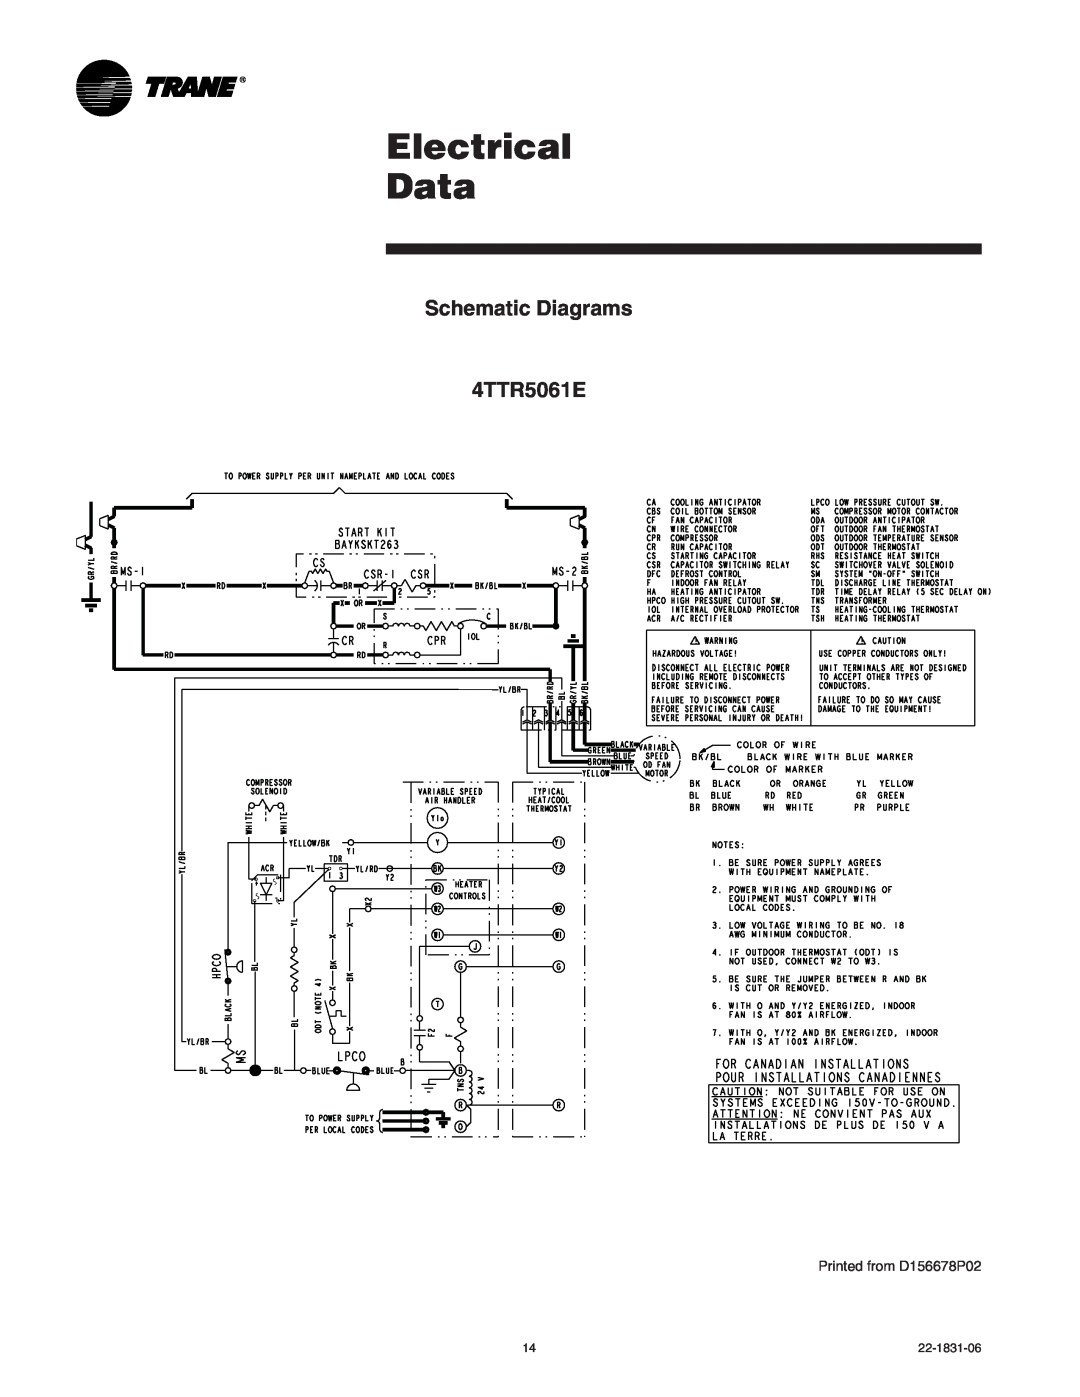 Trane XR15 manual Electrical Data, Schematic Diagrams 4TTR5061E, Printed from D156678P02 